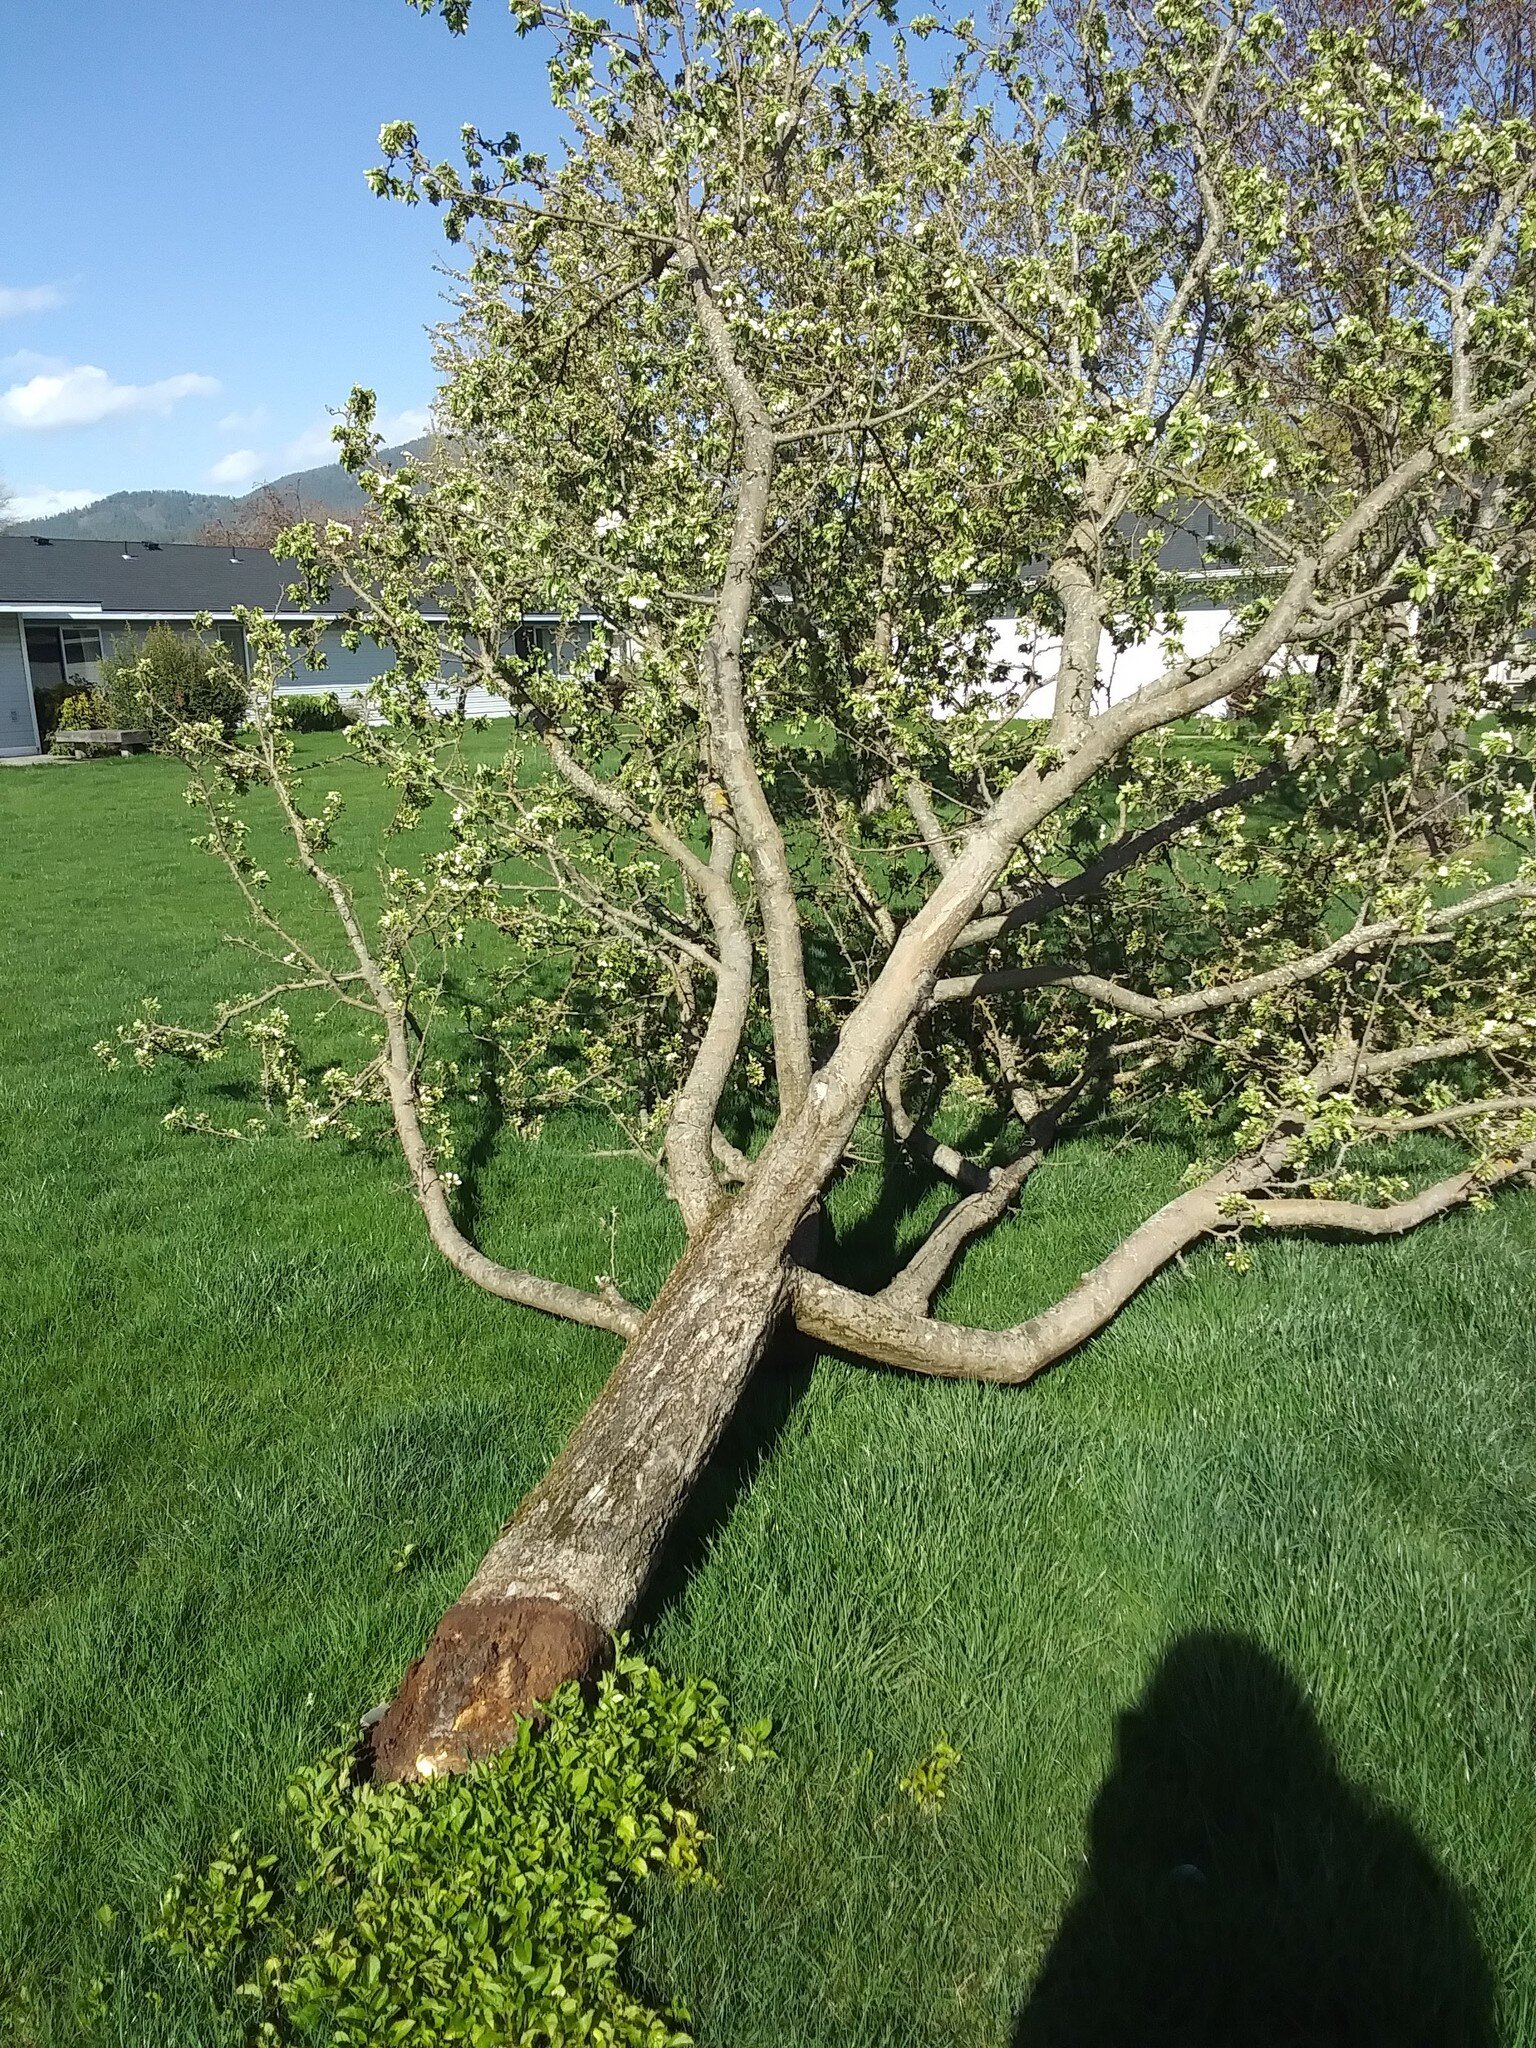 This tree was planted way too deep. A storm came along and blew this little tree right over. To identify a tree that has been planted too deeply, observe if the trunk is growing straight into the ground, resembling a pole. Trees that are suffering du